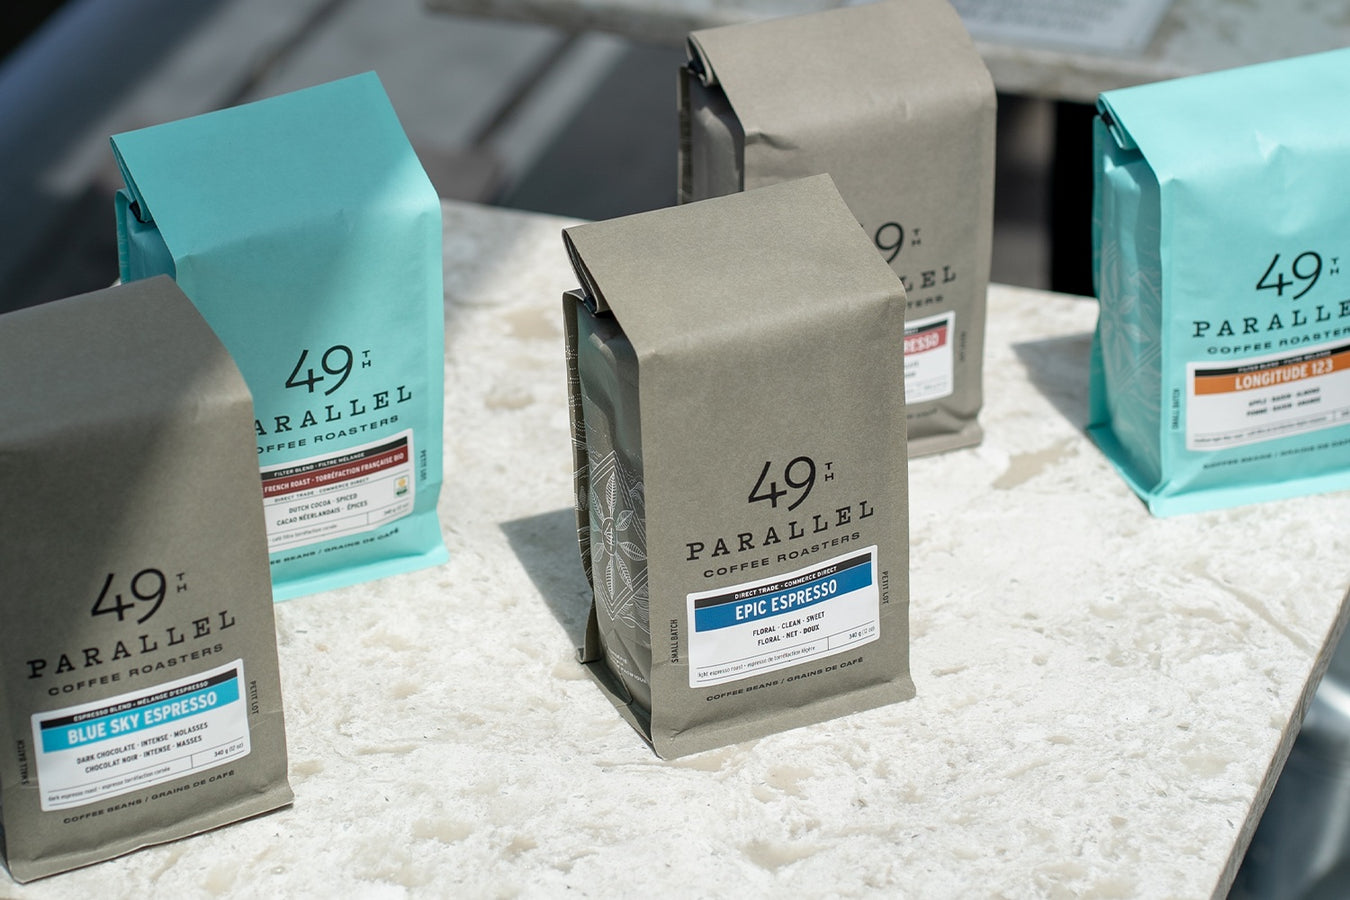 Meilleures ventes - 49th Parallel Coffee Roasters